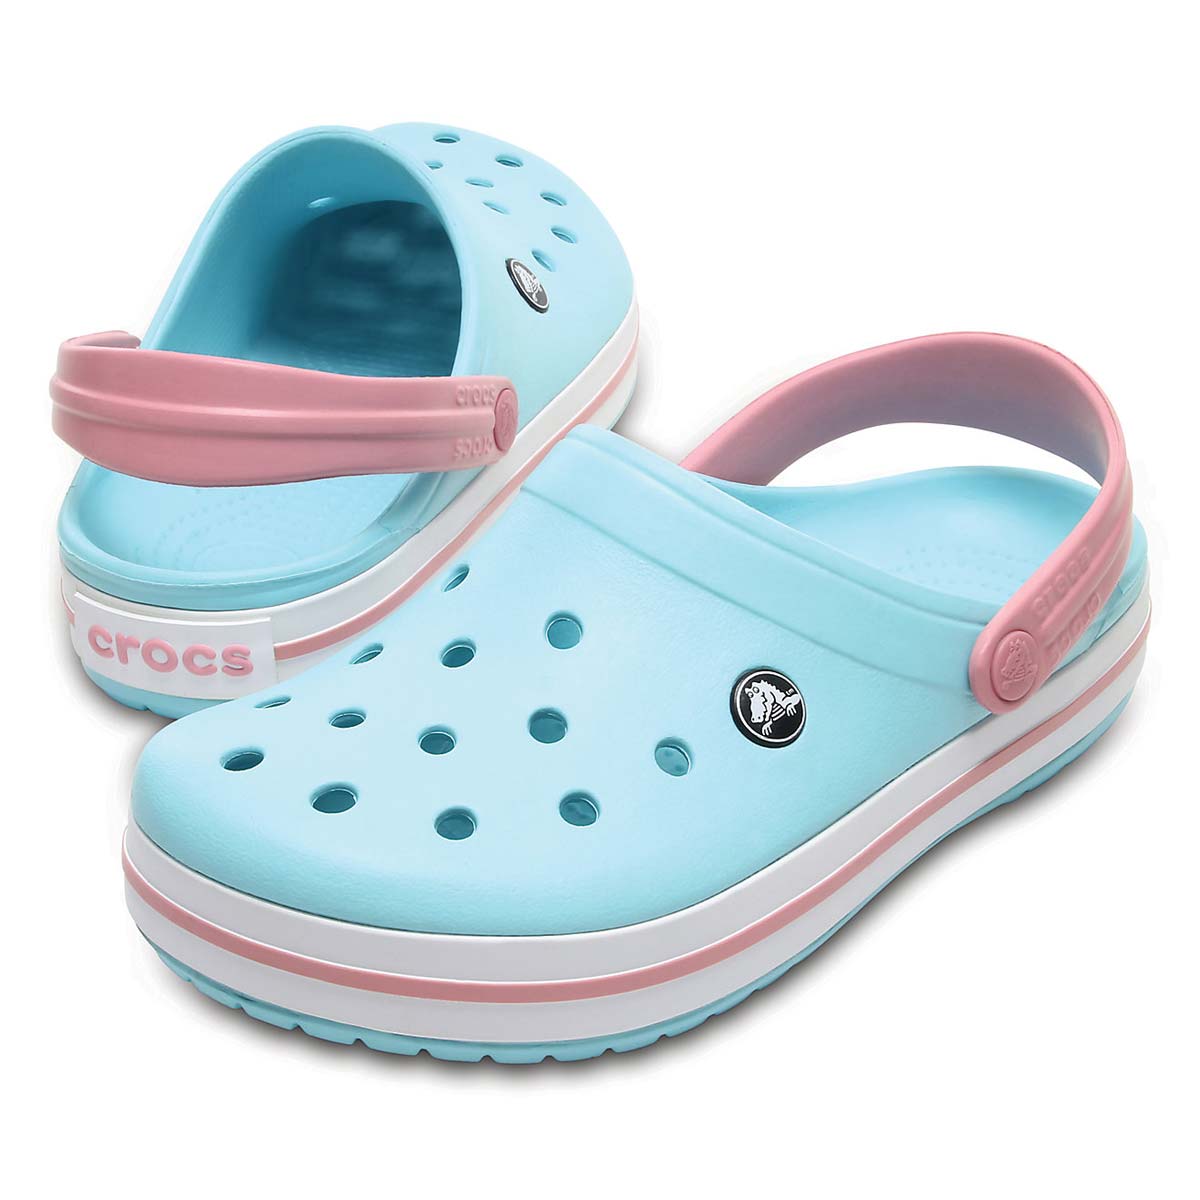 Buy Crocs Crocband (Ice Blue) Online at Lowest Price in India